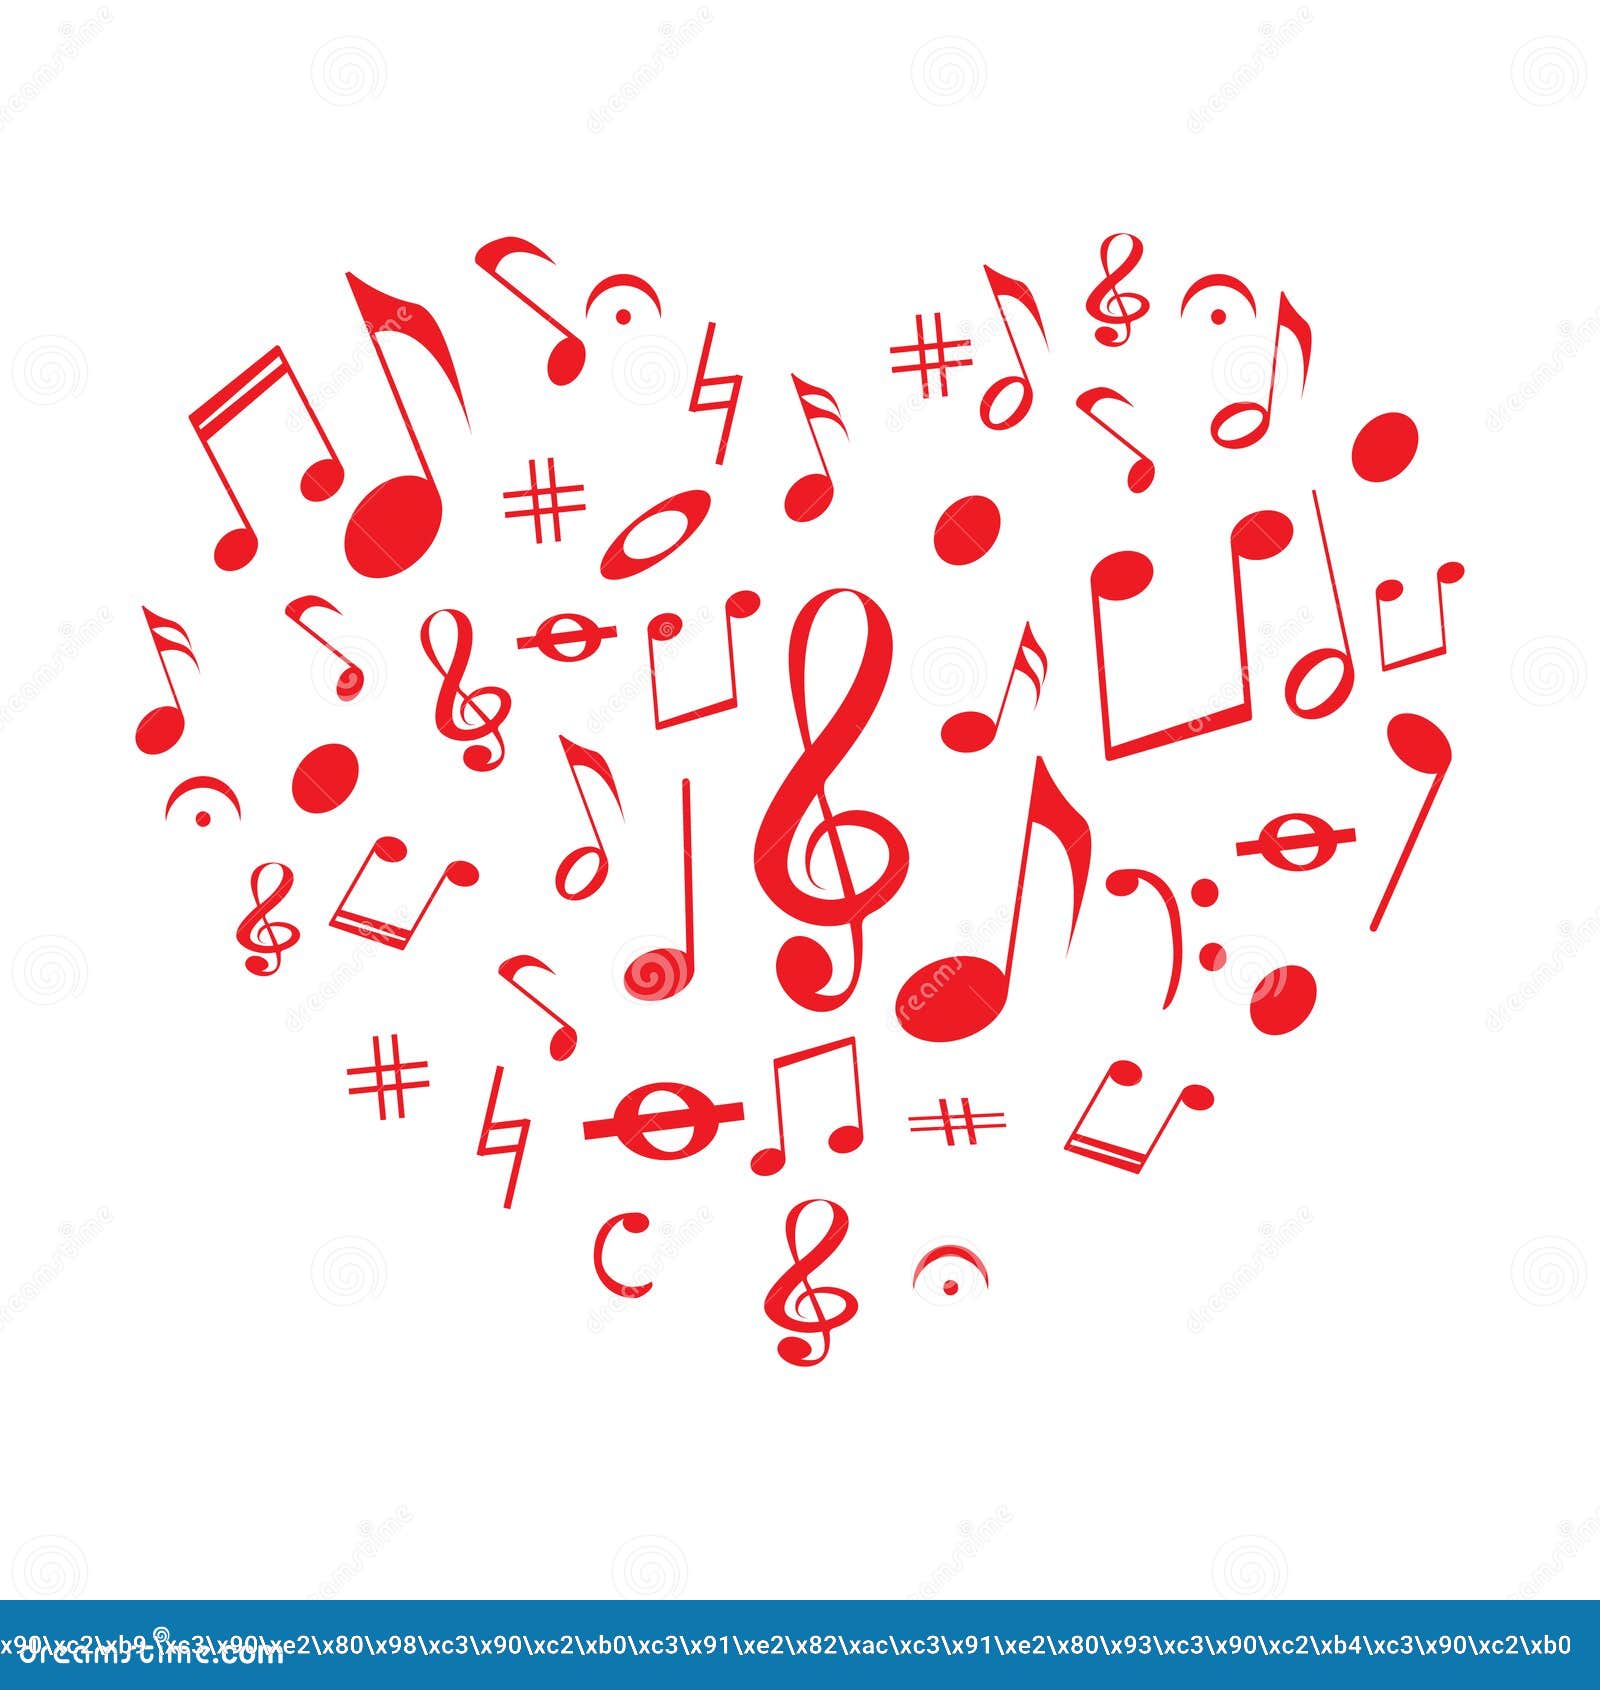 Design Of The Heart With Red Music Notes Stock Vector Illustration Of Isolated Romance